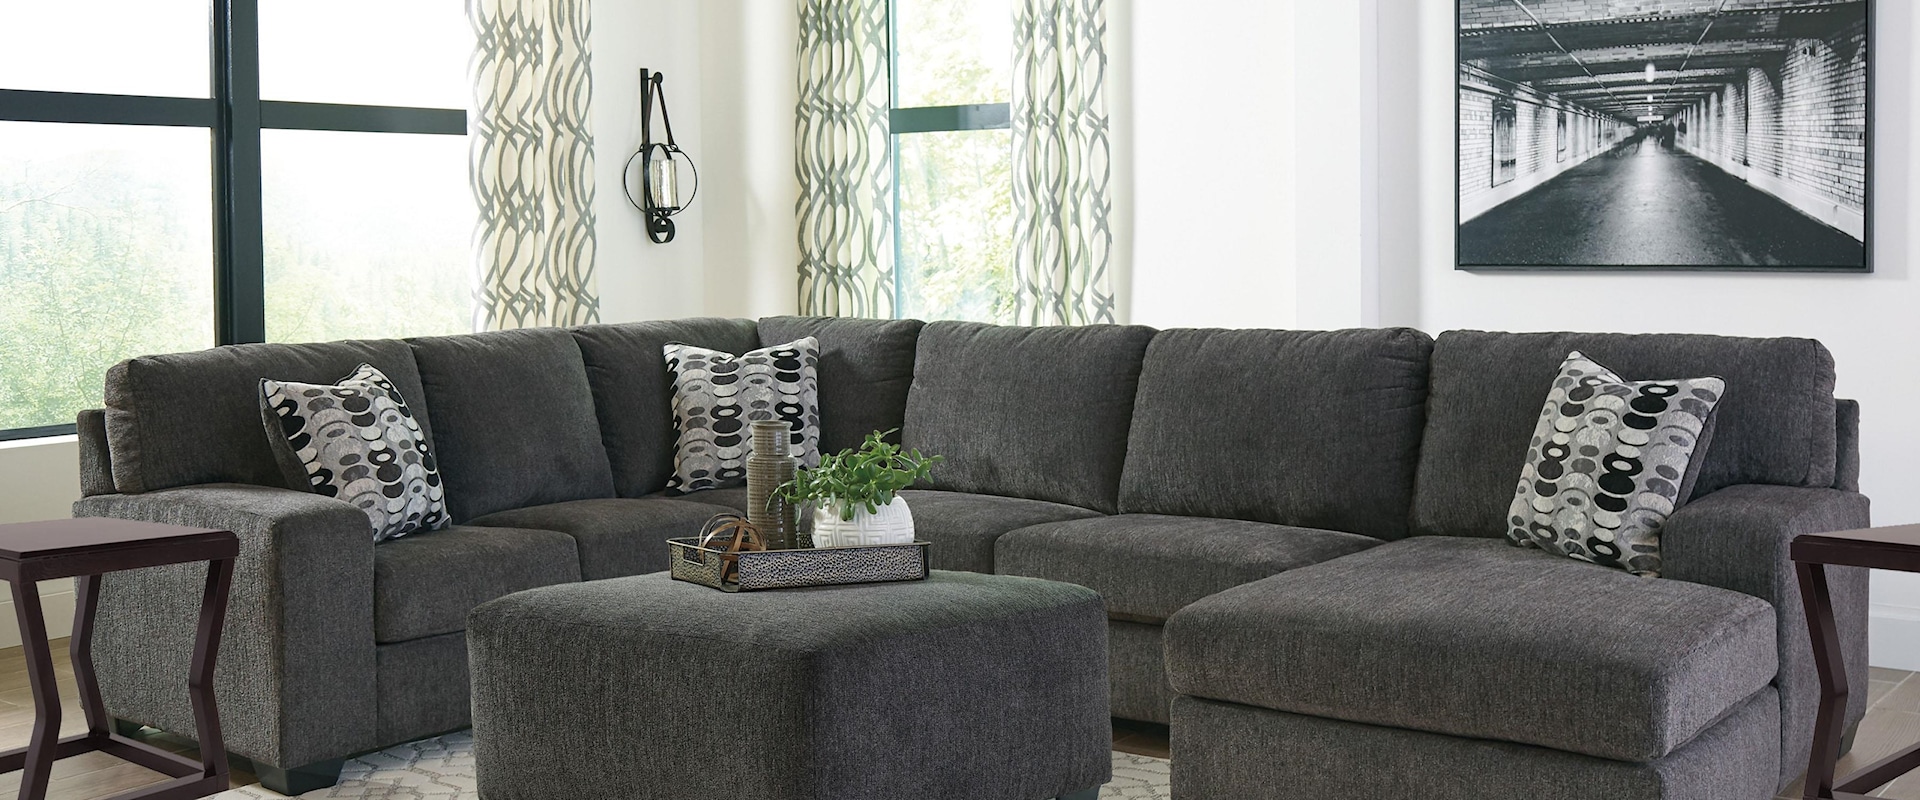 6PC Living Room Group